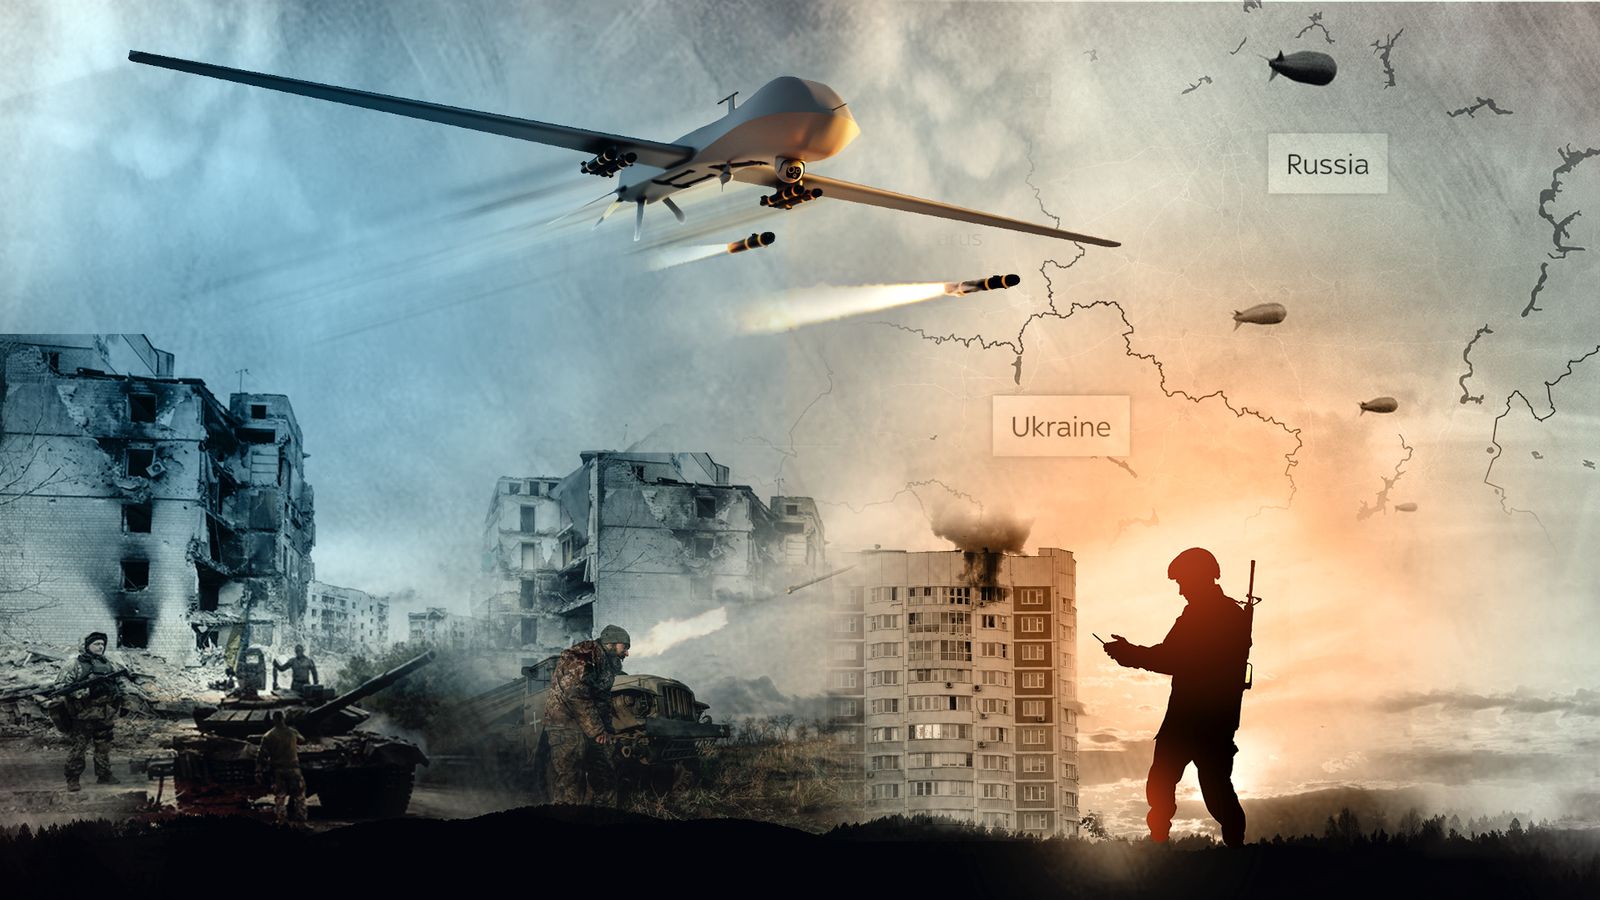 Ukraine's underdogs are outfoxing archaic Russia with drone warfare - but their raids won't end the war